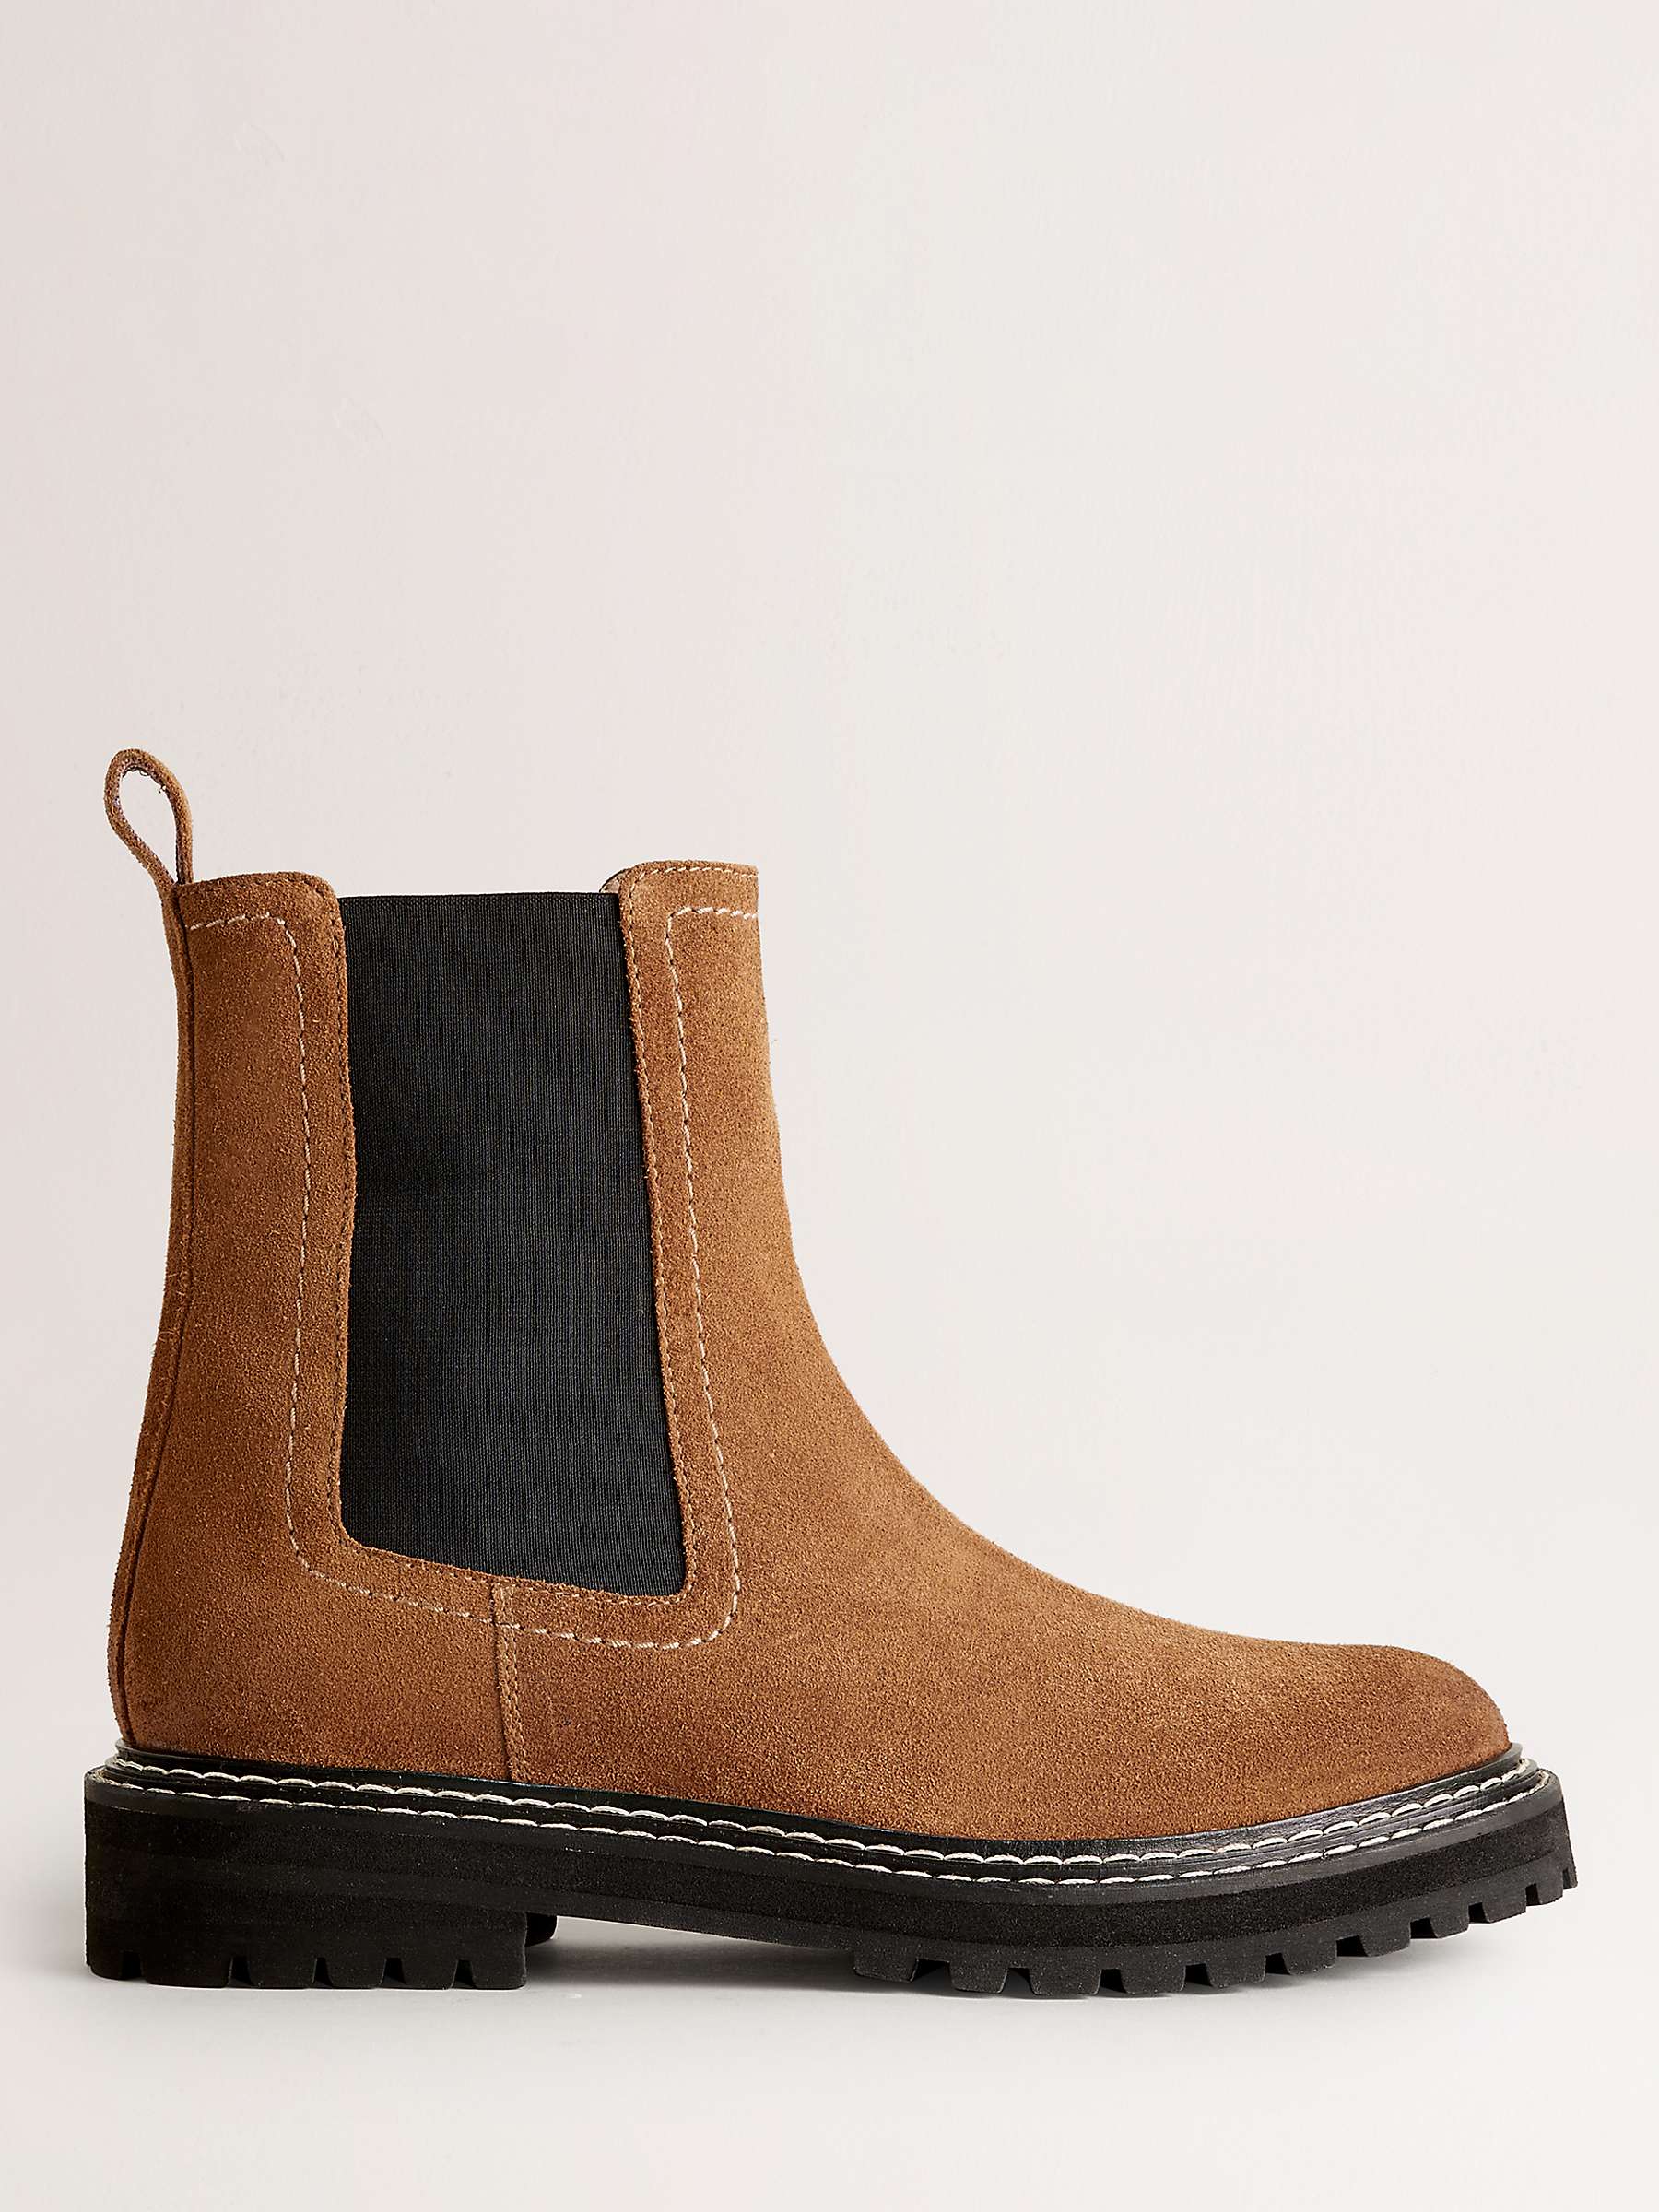 Boden Suede Chunky Chelsea Boots, Gold Brown at John Lewis & Partners